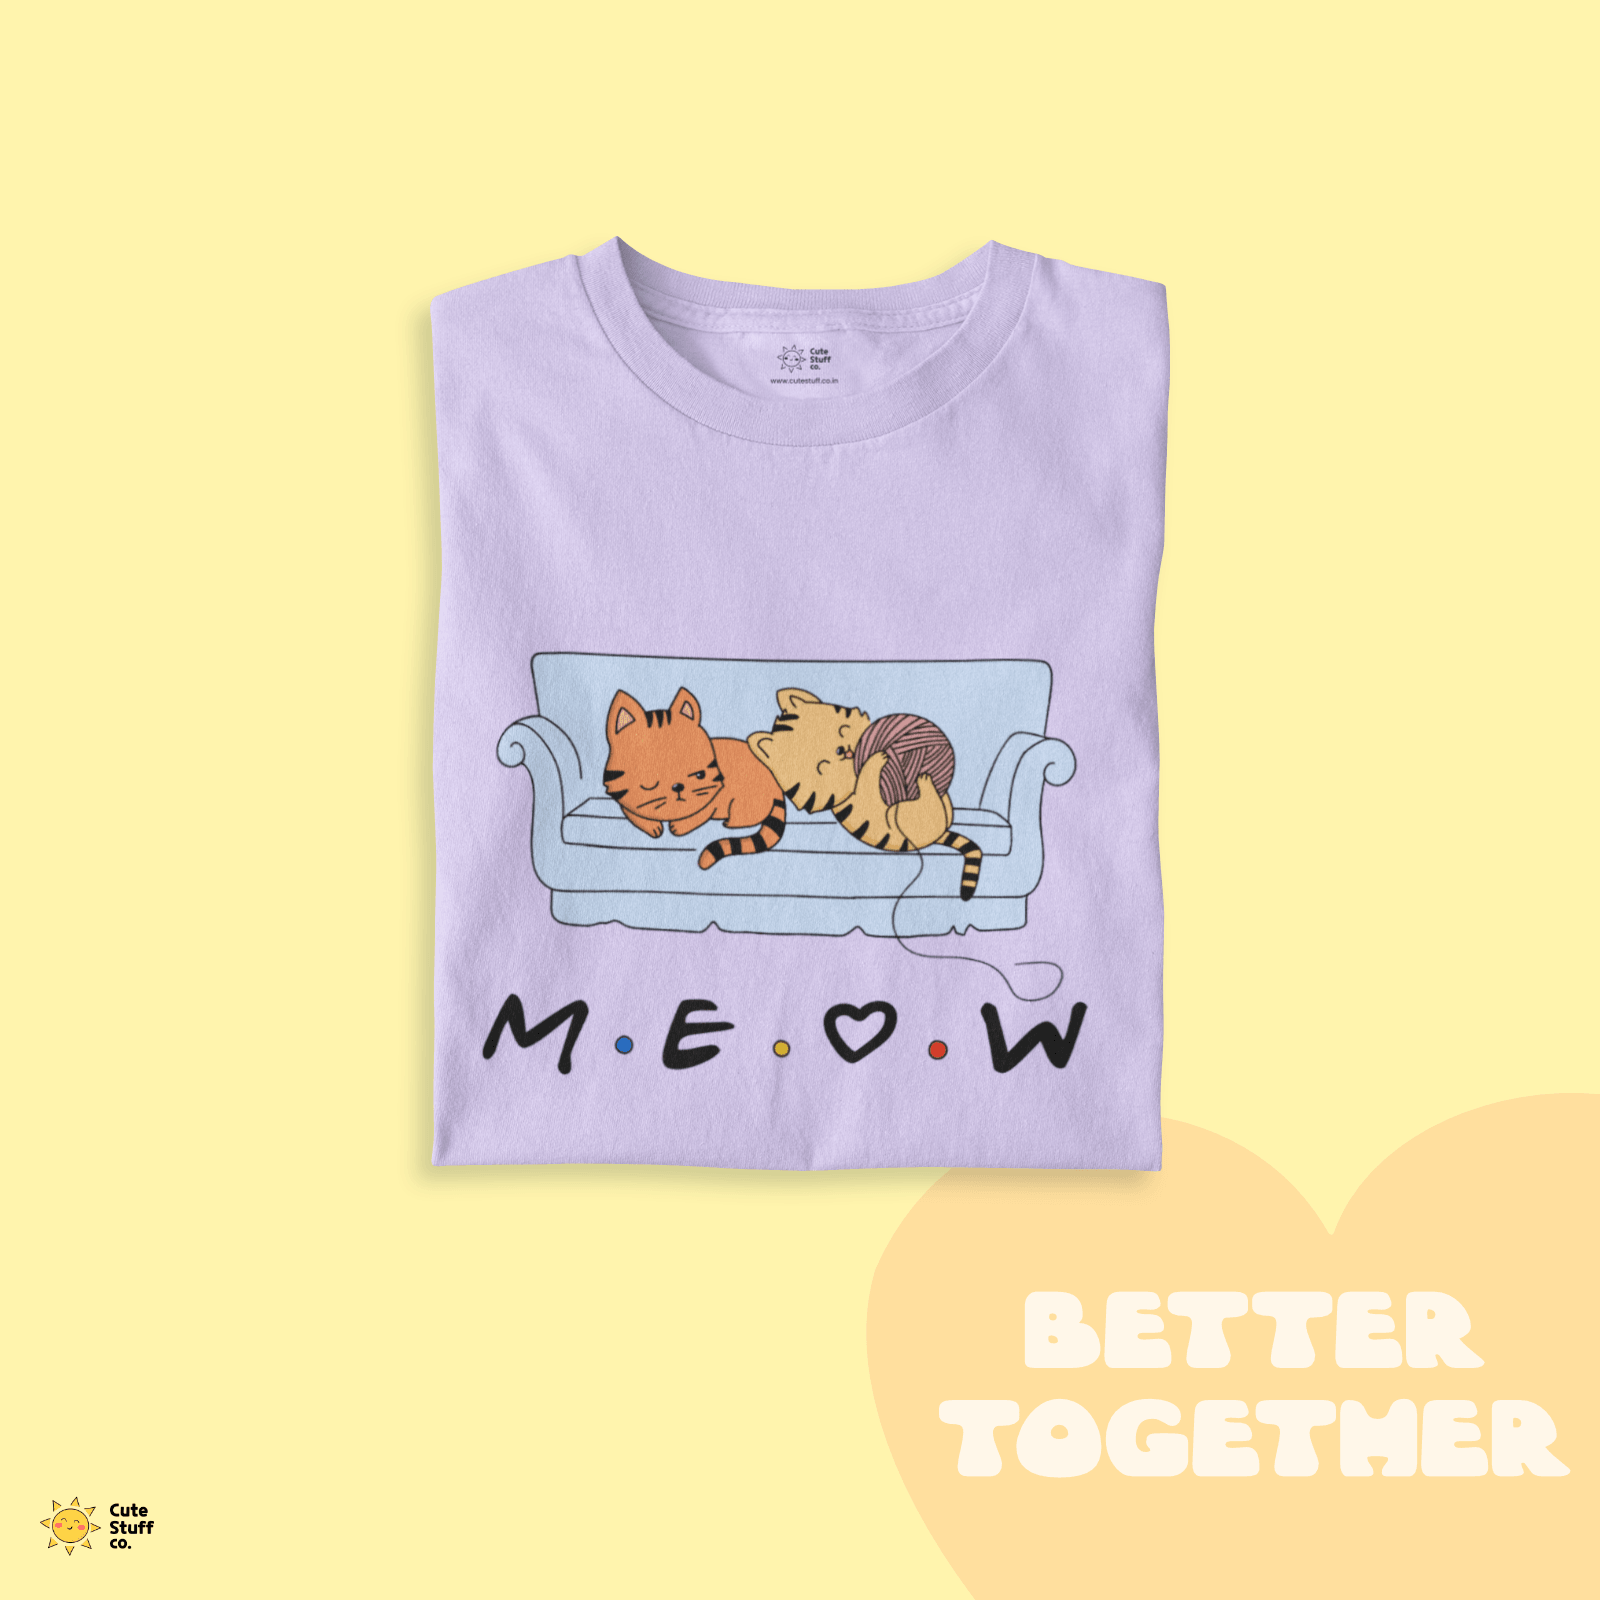 Meow Me Oversized Unisex T-shirts - Better Together - Cute Stuff India